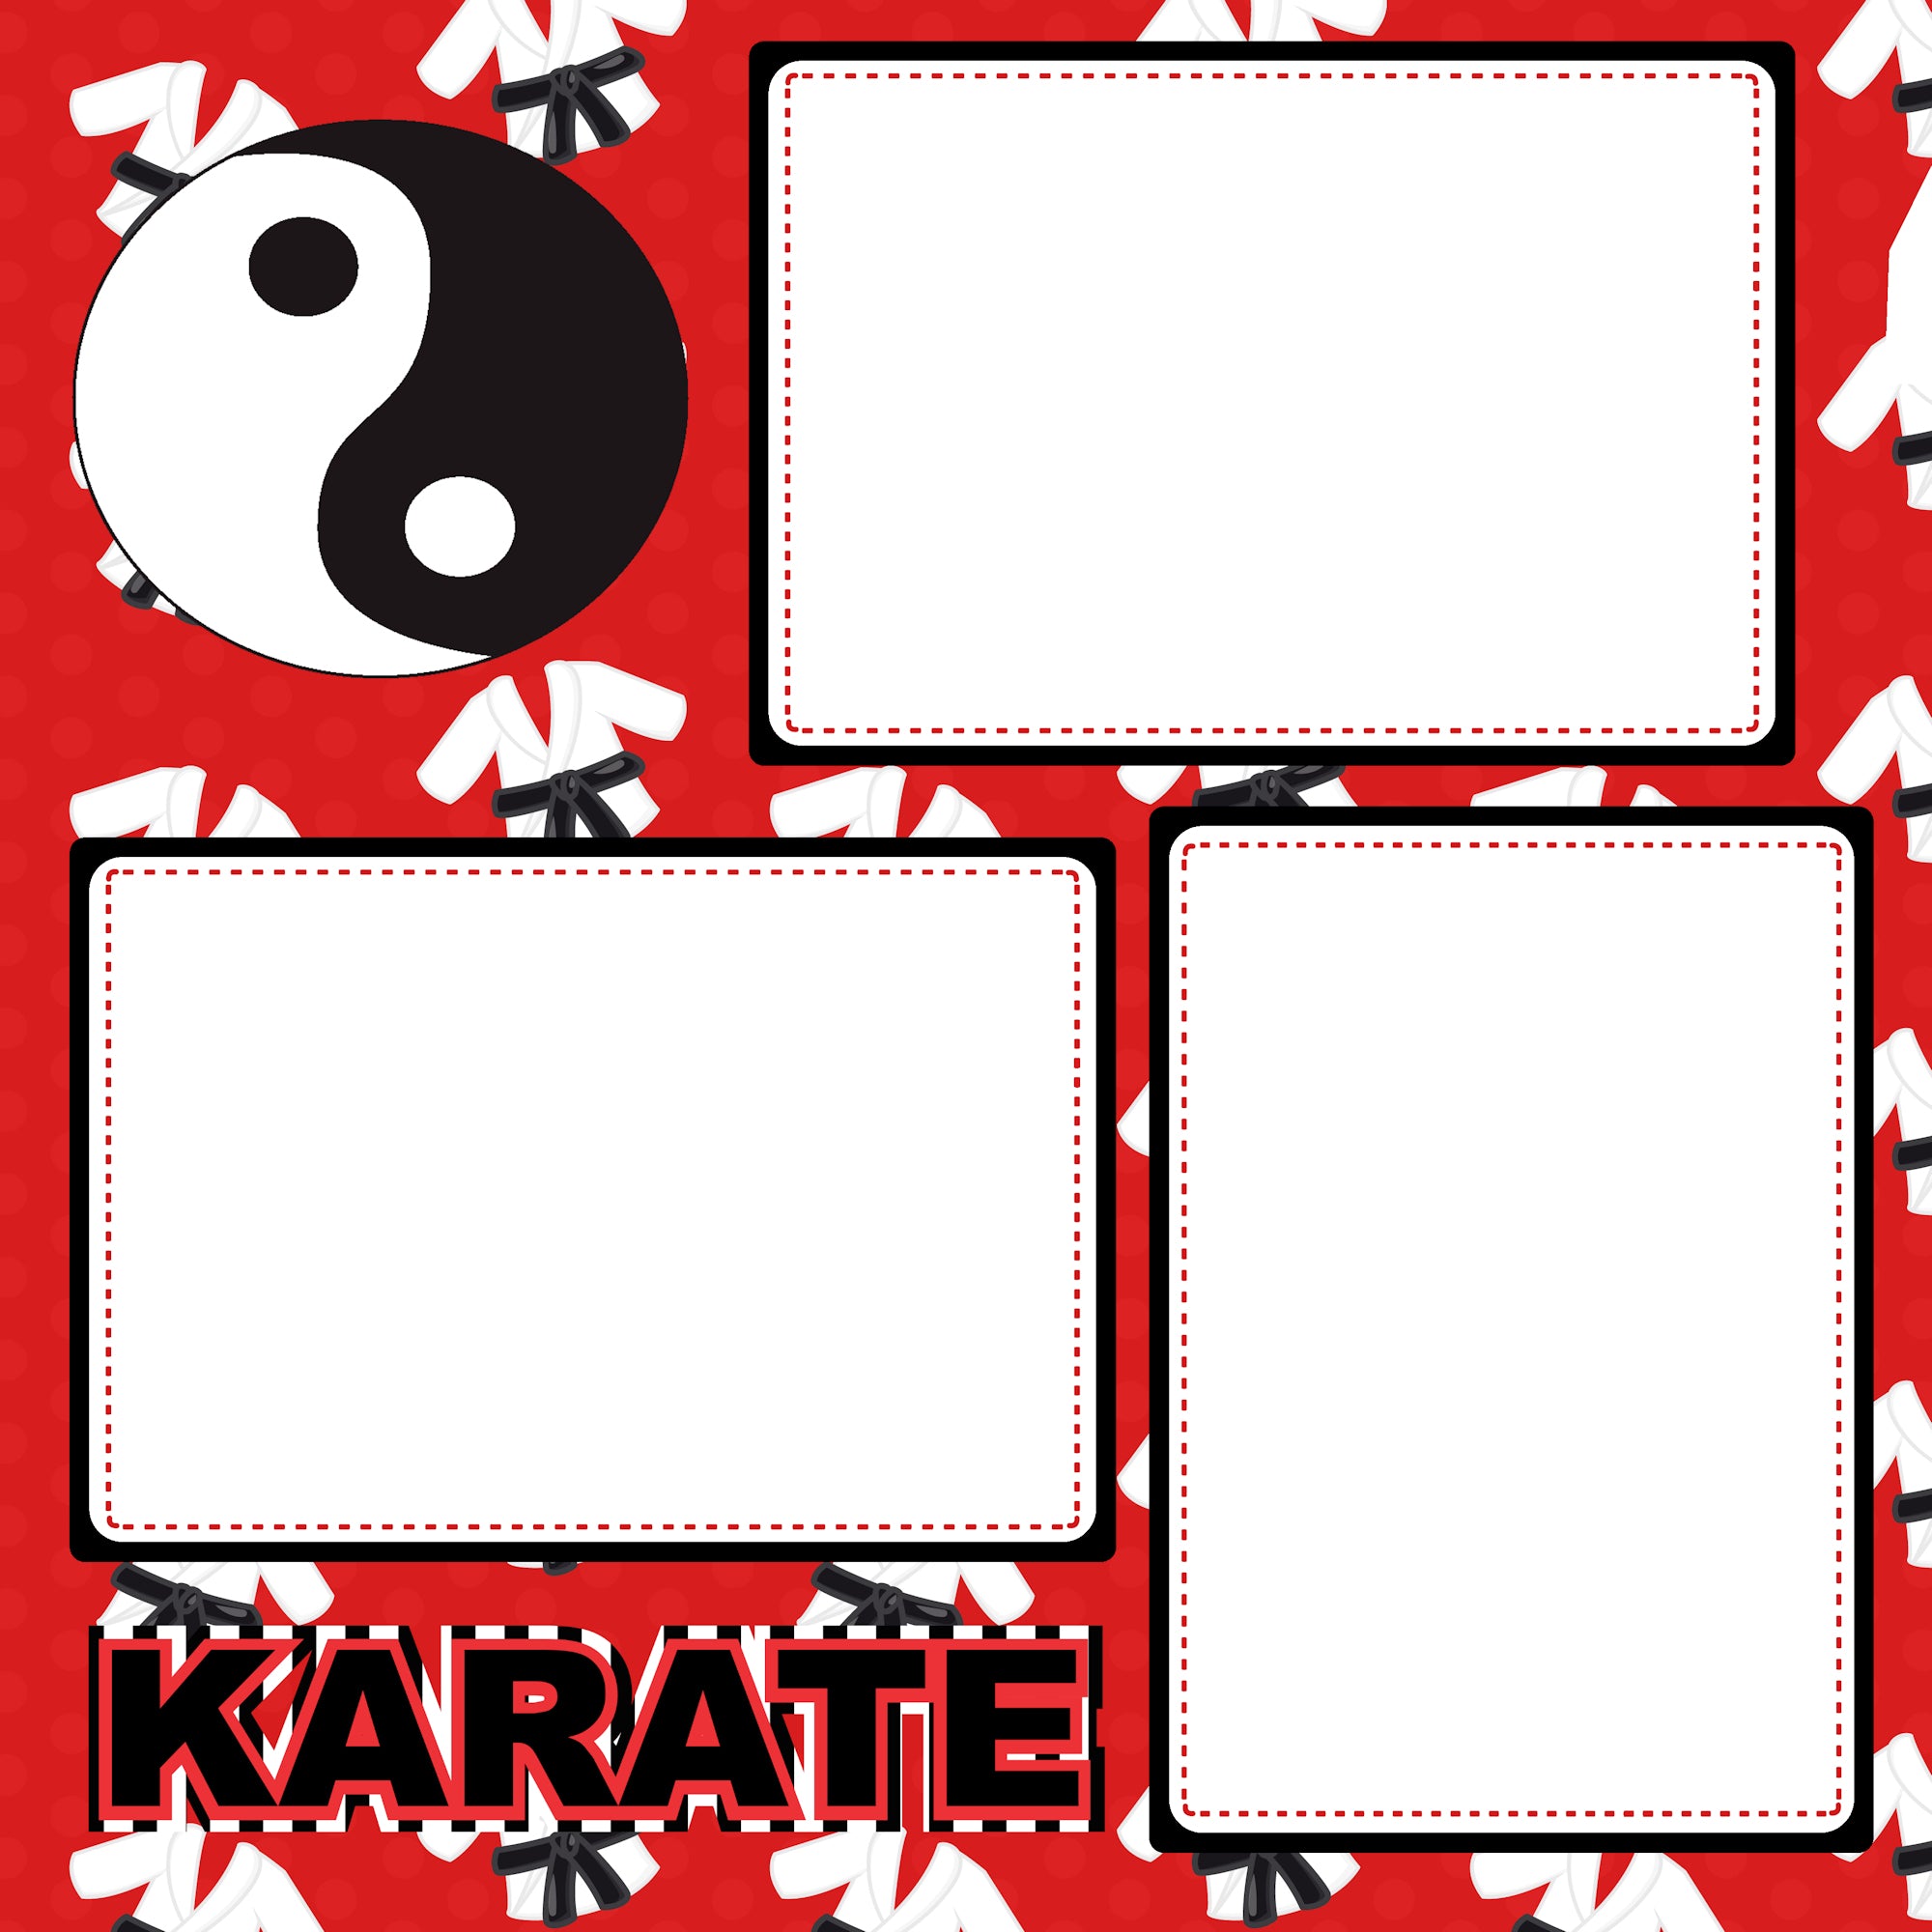 Karate (2) - 12 x 12 Premade, Printed Scrapbook Pages by SSC Designs